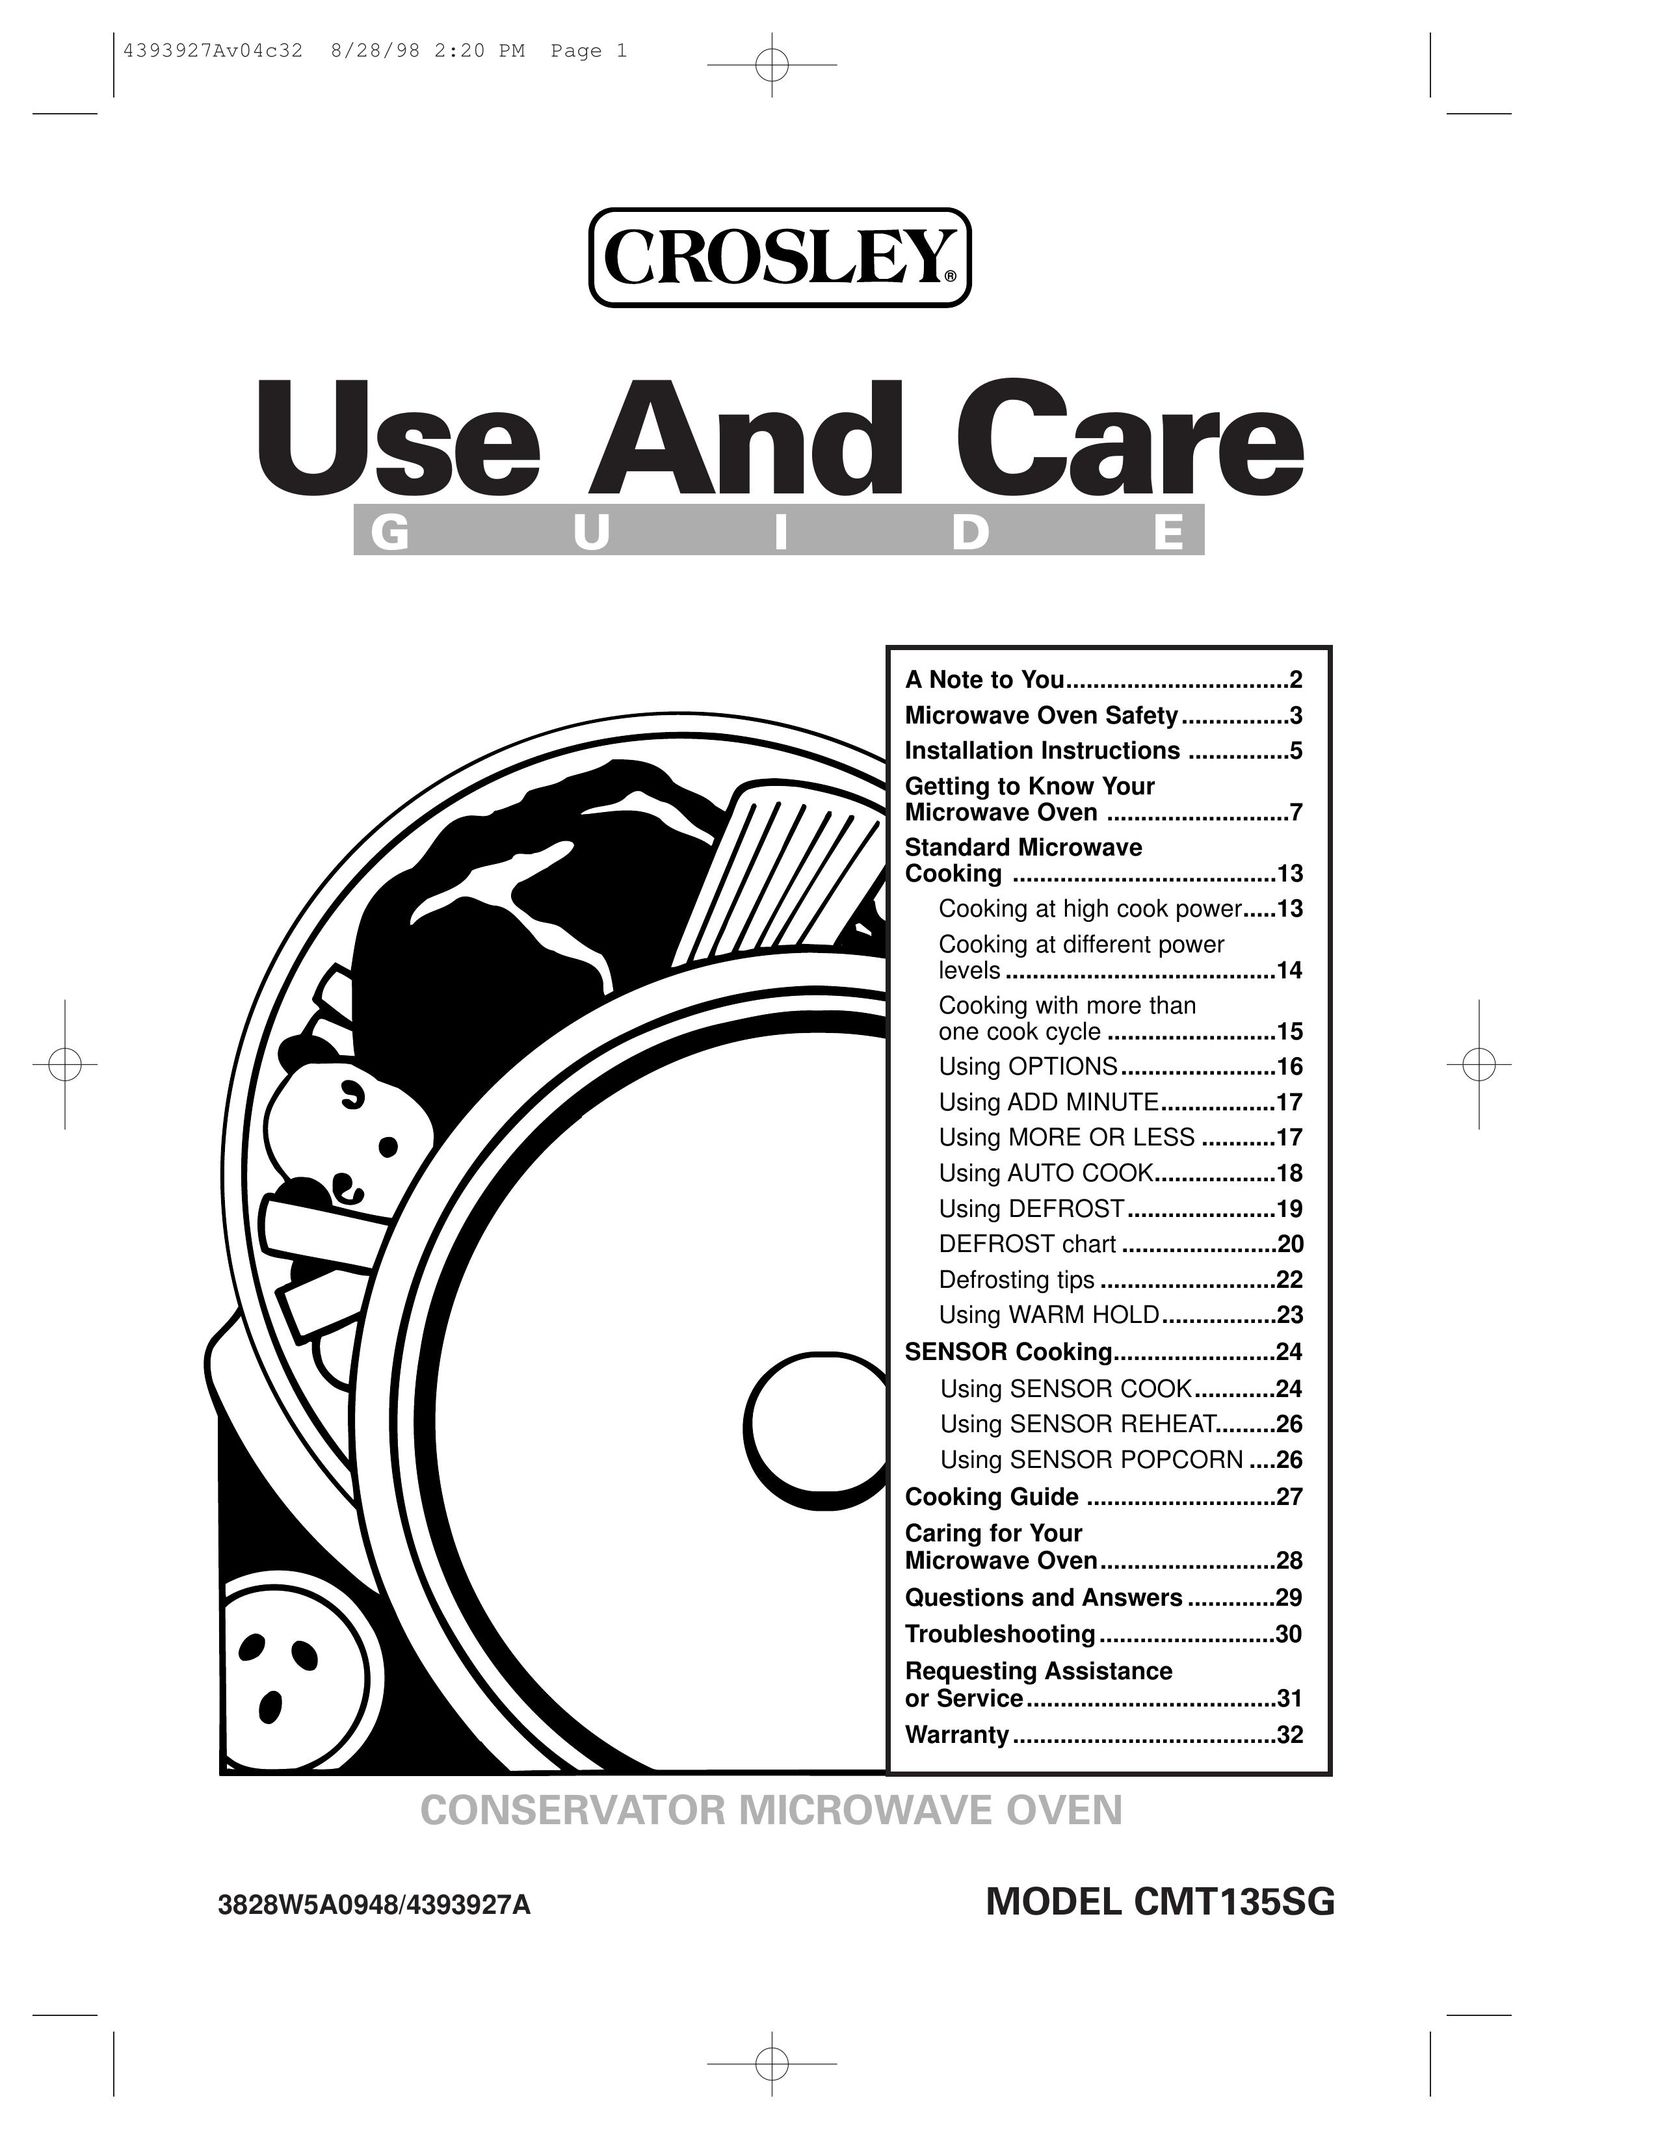 Crosley CMT135SG Microwave Oven User Manual